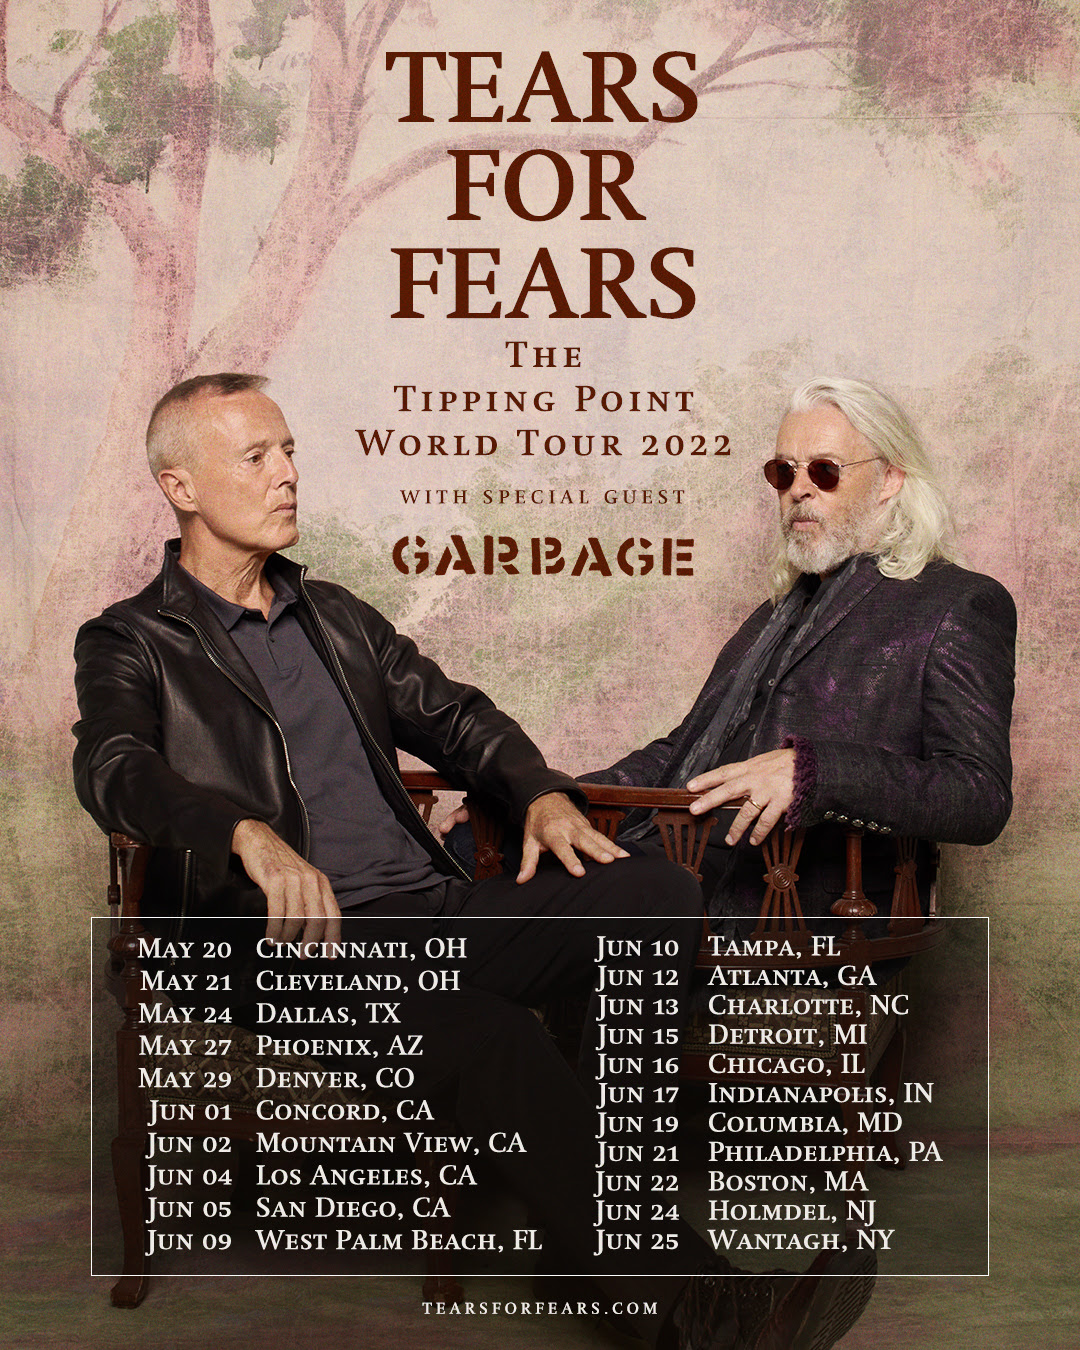 Tears For Fears Announce The North American Leg of The Tipping Point World Tour